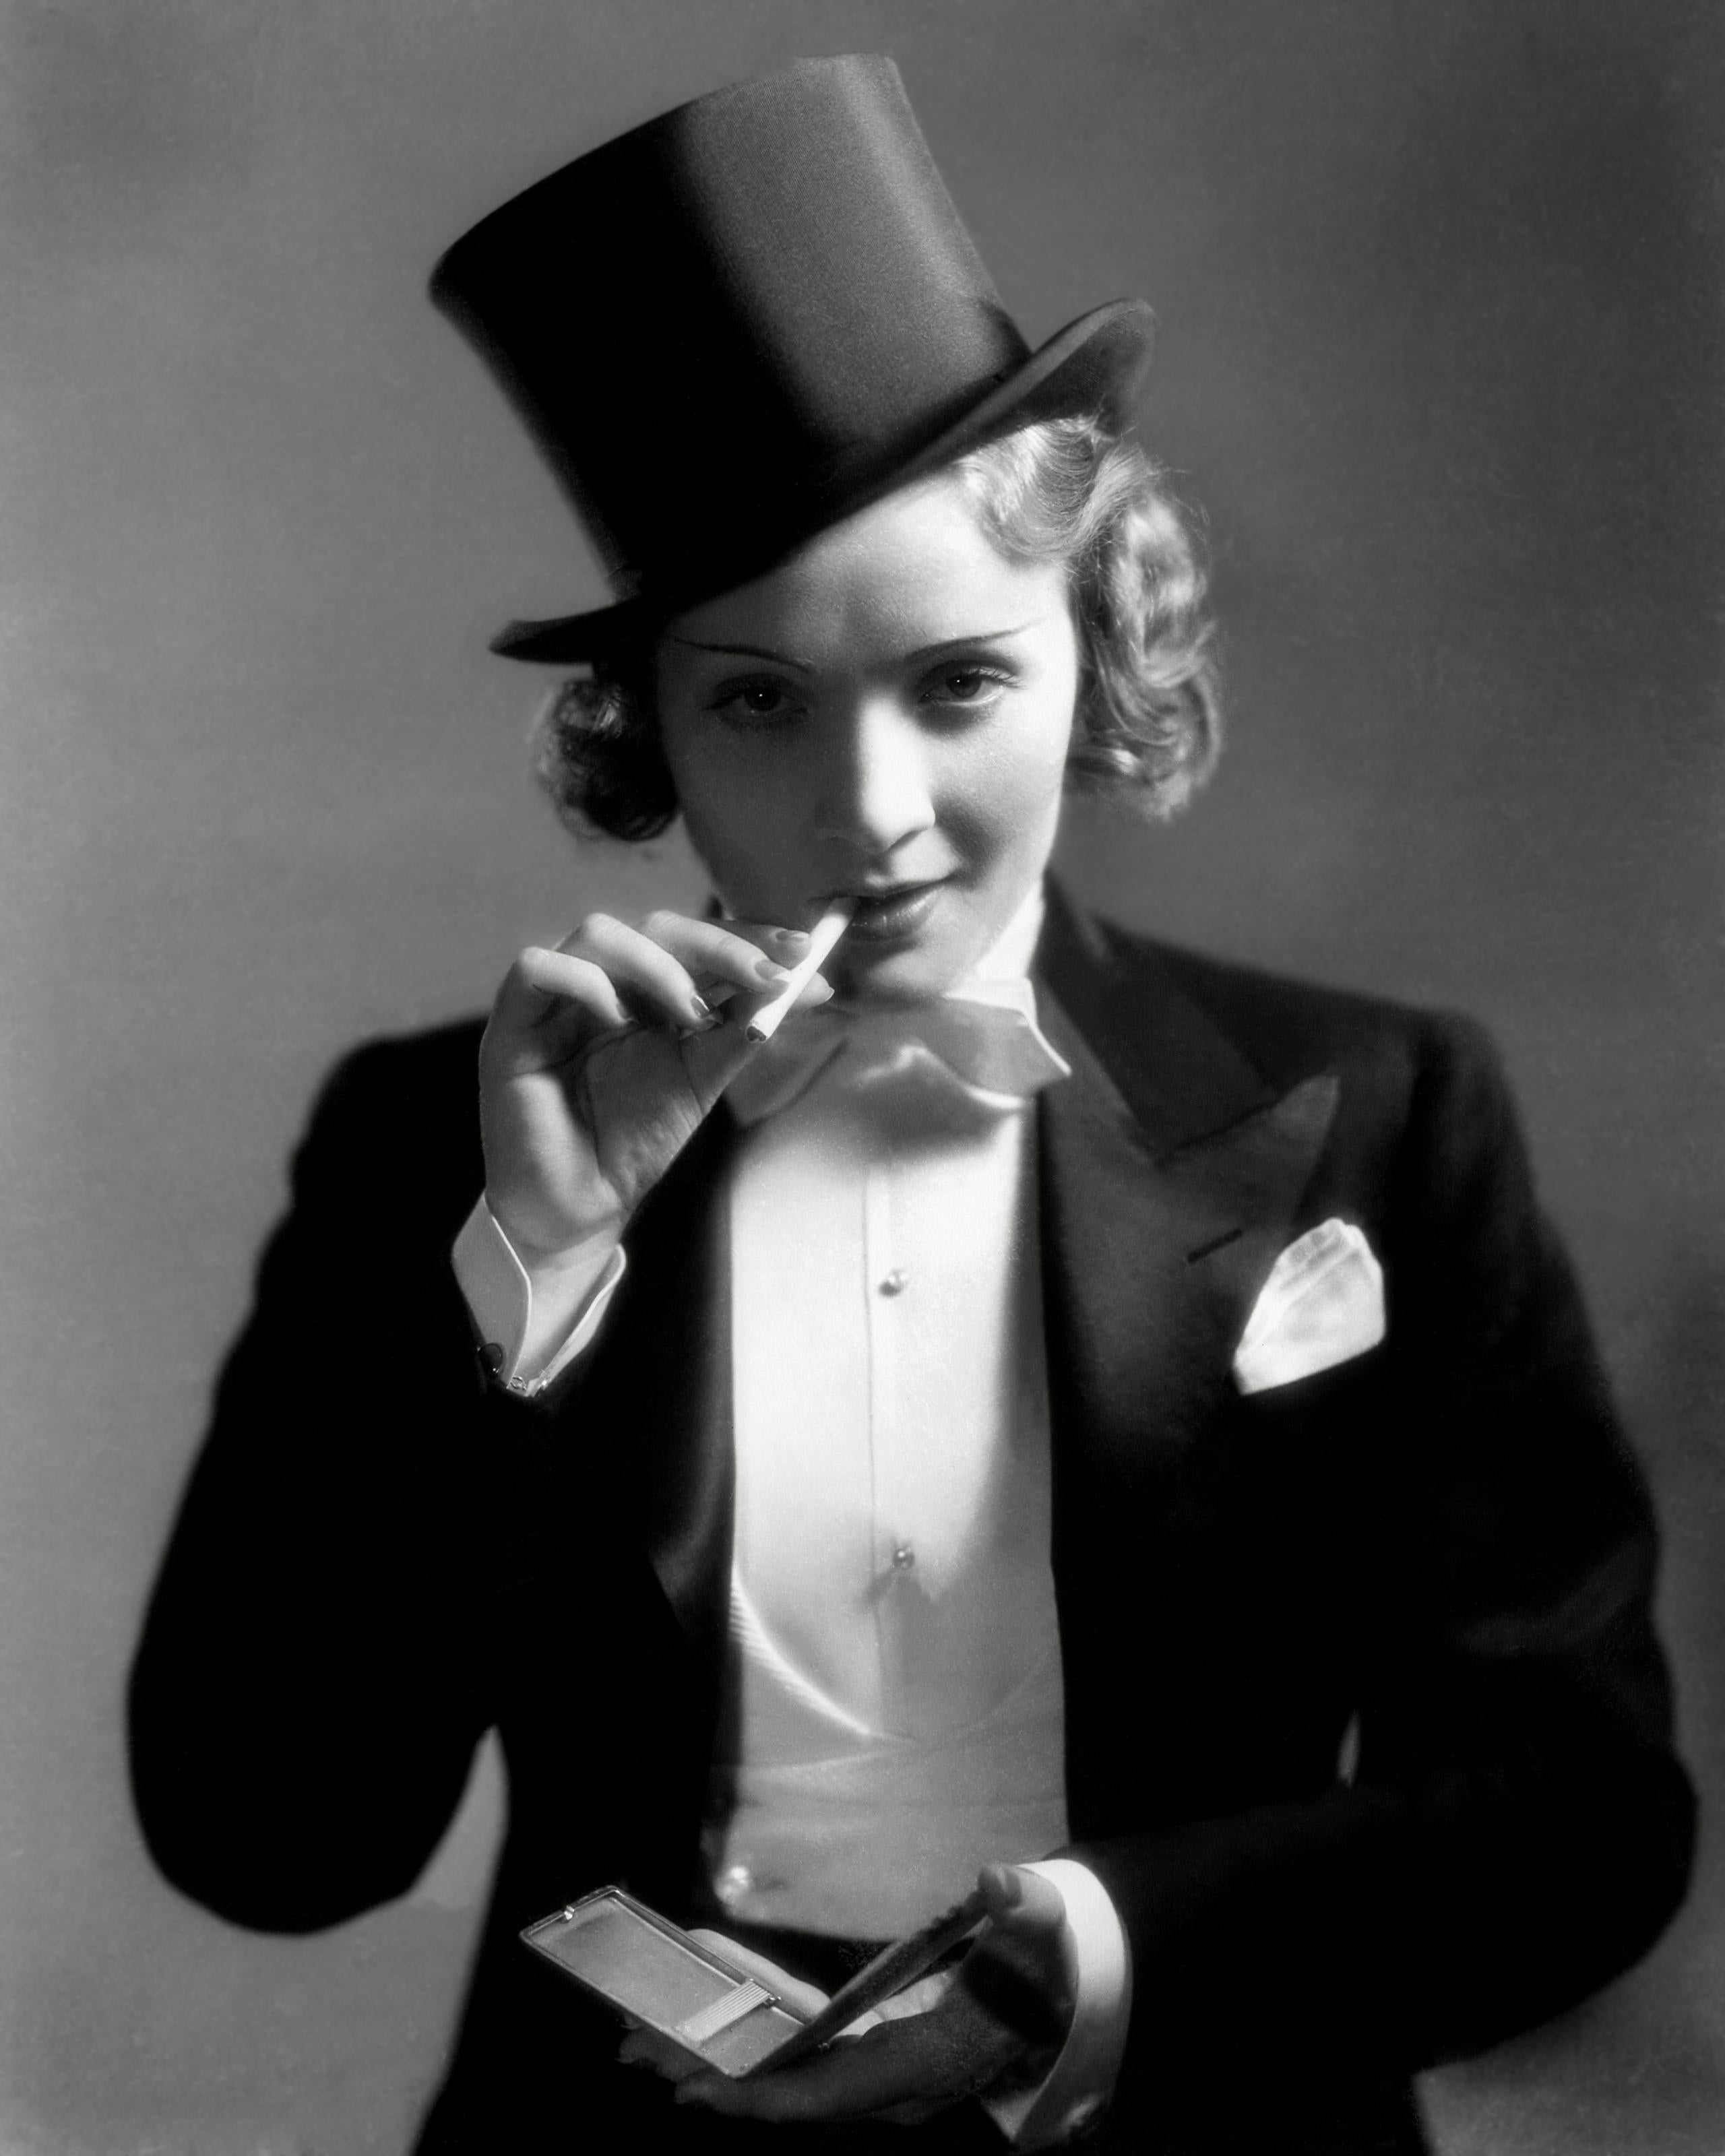 Unknown Black and White Photograph – Marlene Dietrich in Suit for "Morocco" Globe Photos Fine Art Print